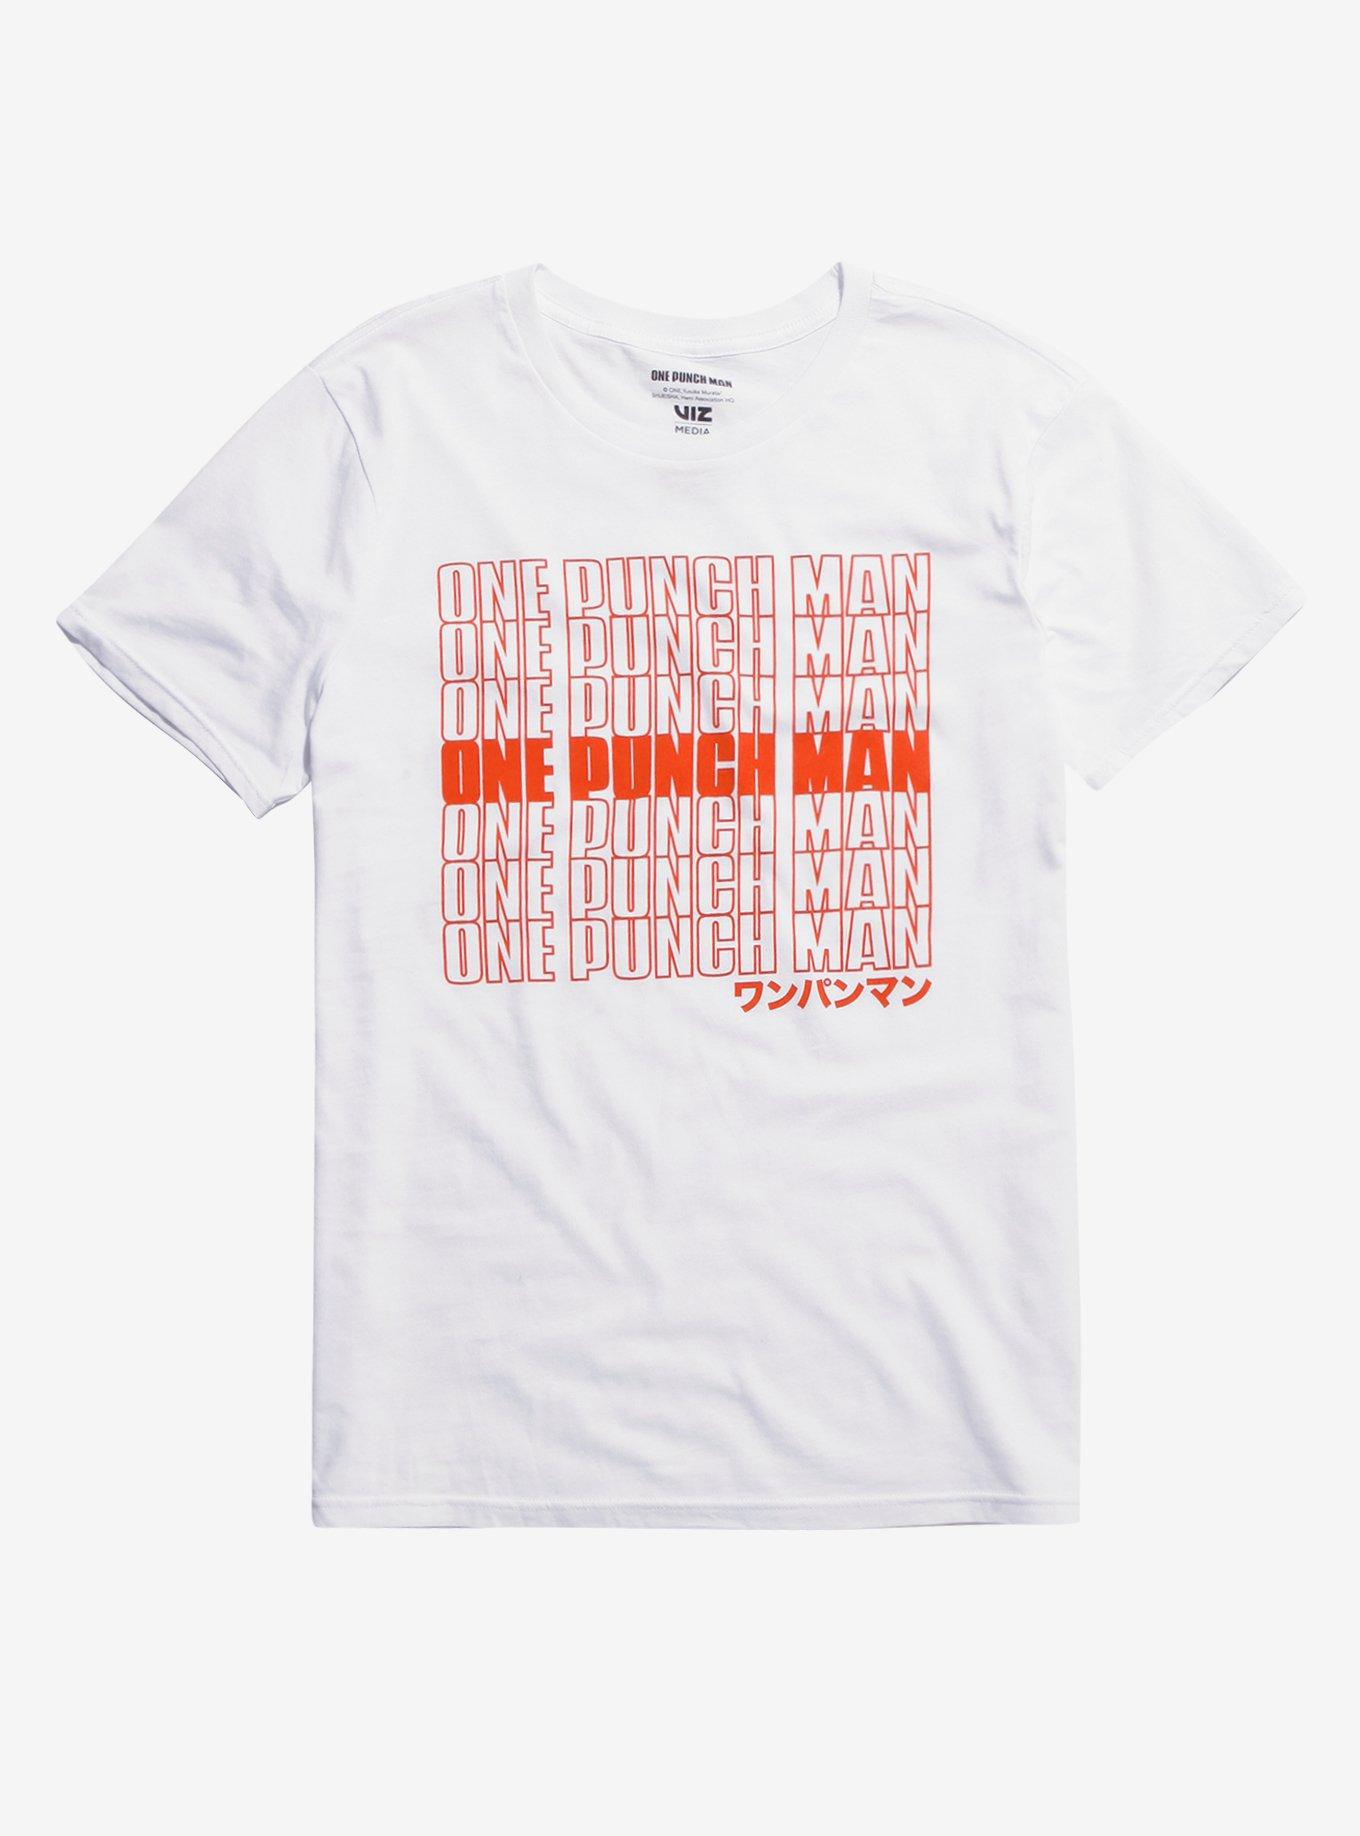 One Punch Man Grocery Bag T-Shirt, MULTI, hi-res